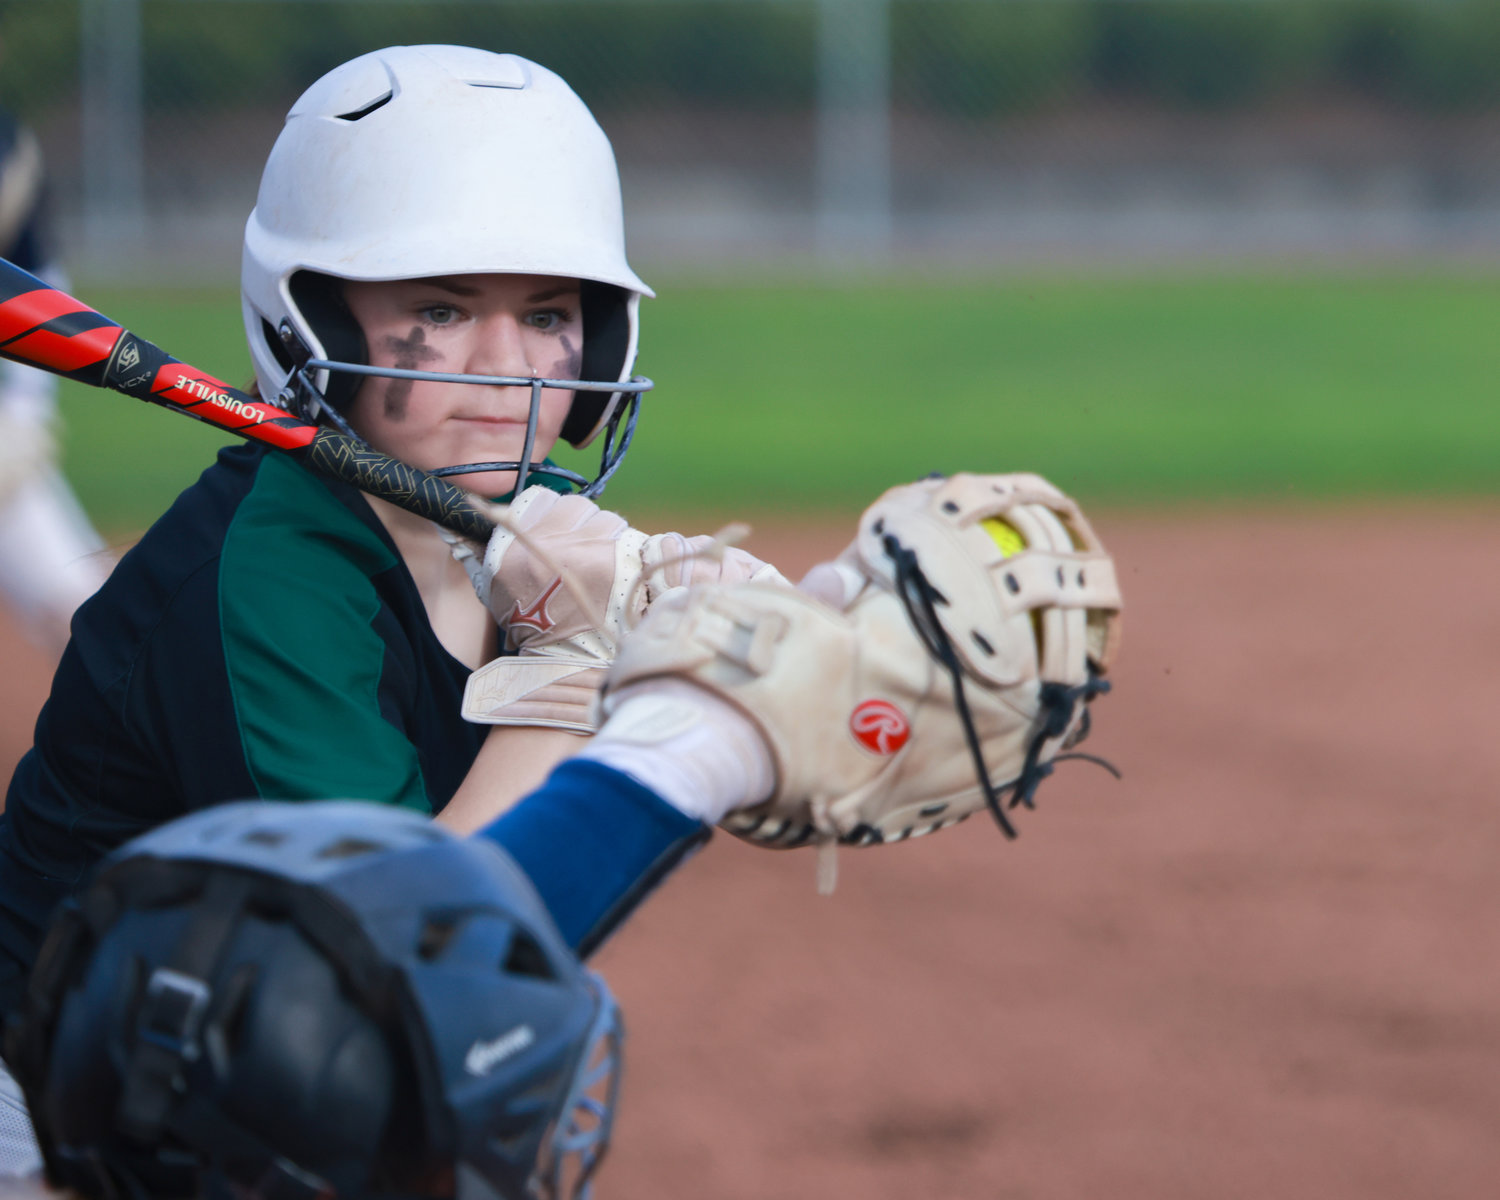 Woodland's Gabi Silveria watches a pitch as it goes into the catcher's glove during a game against Kelso on Wednesday, March 29.